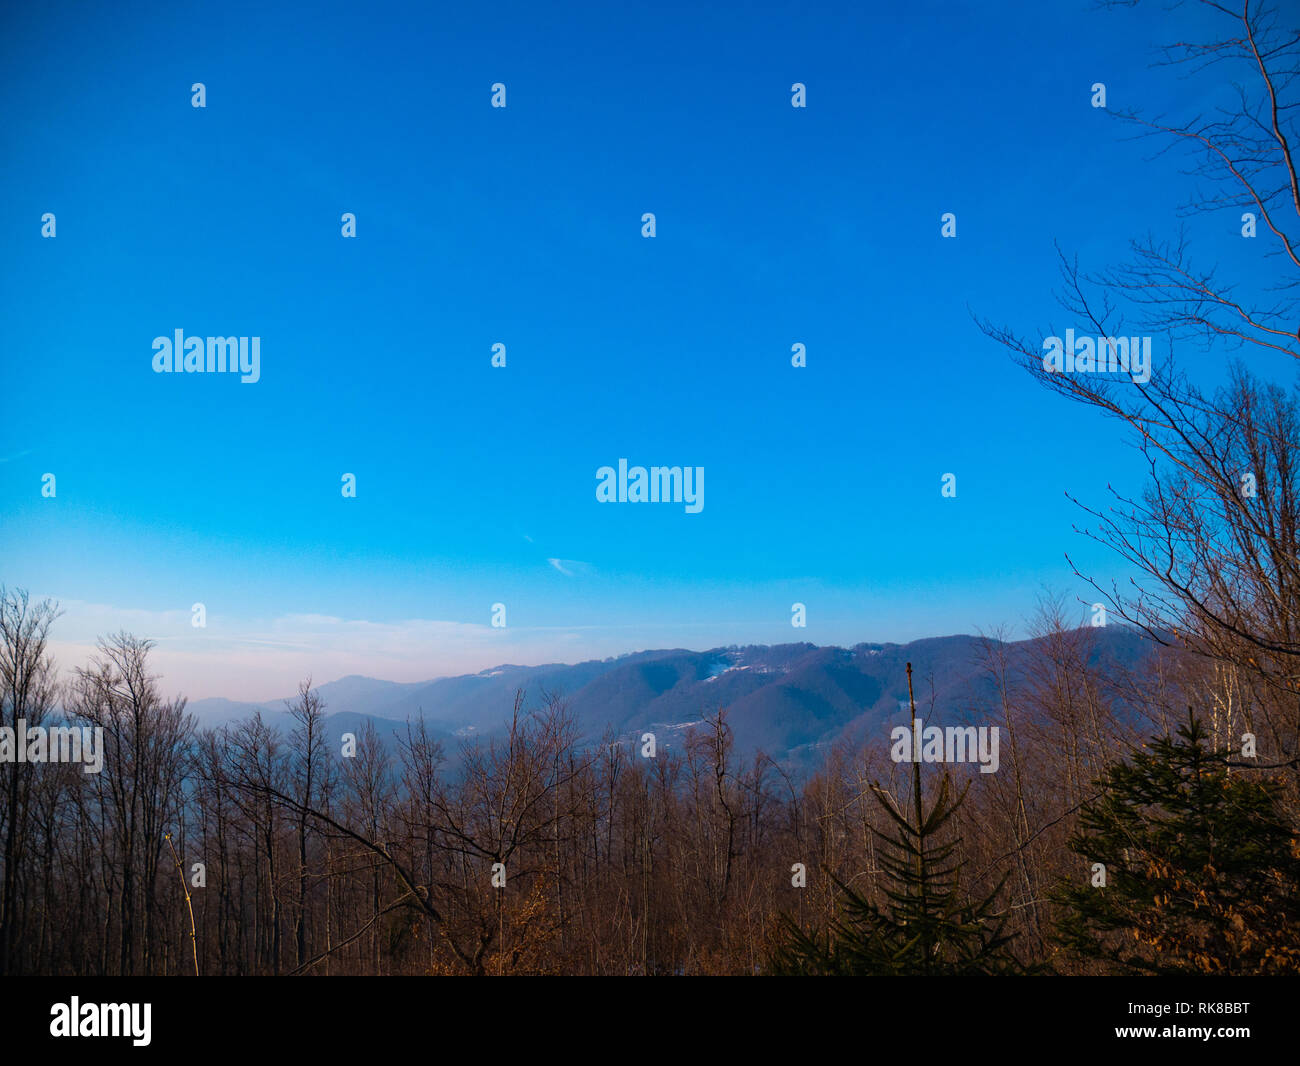 Trees on the background of high mountains at sunset Stock Photo